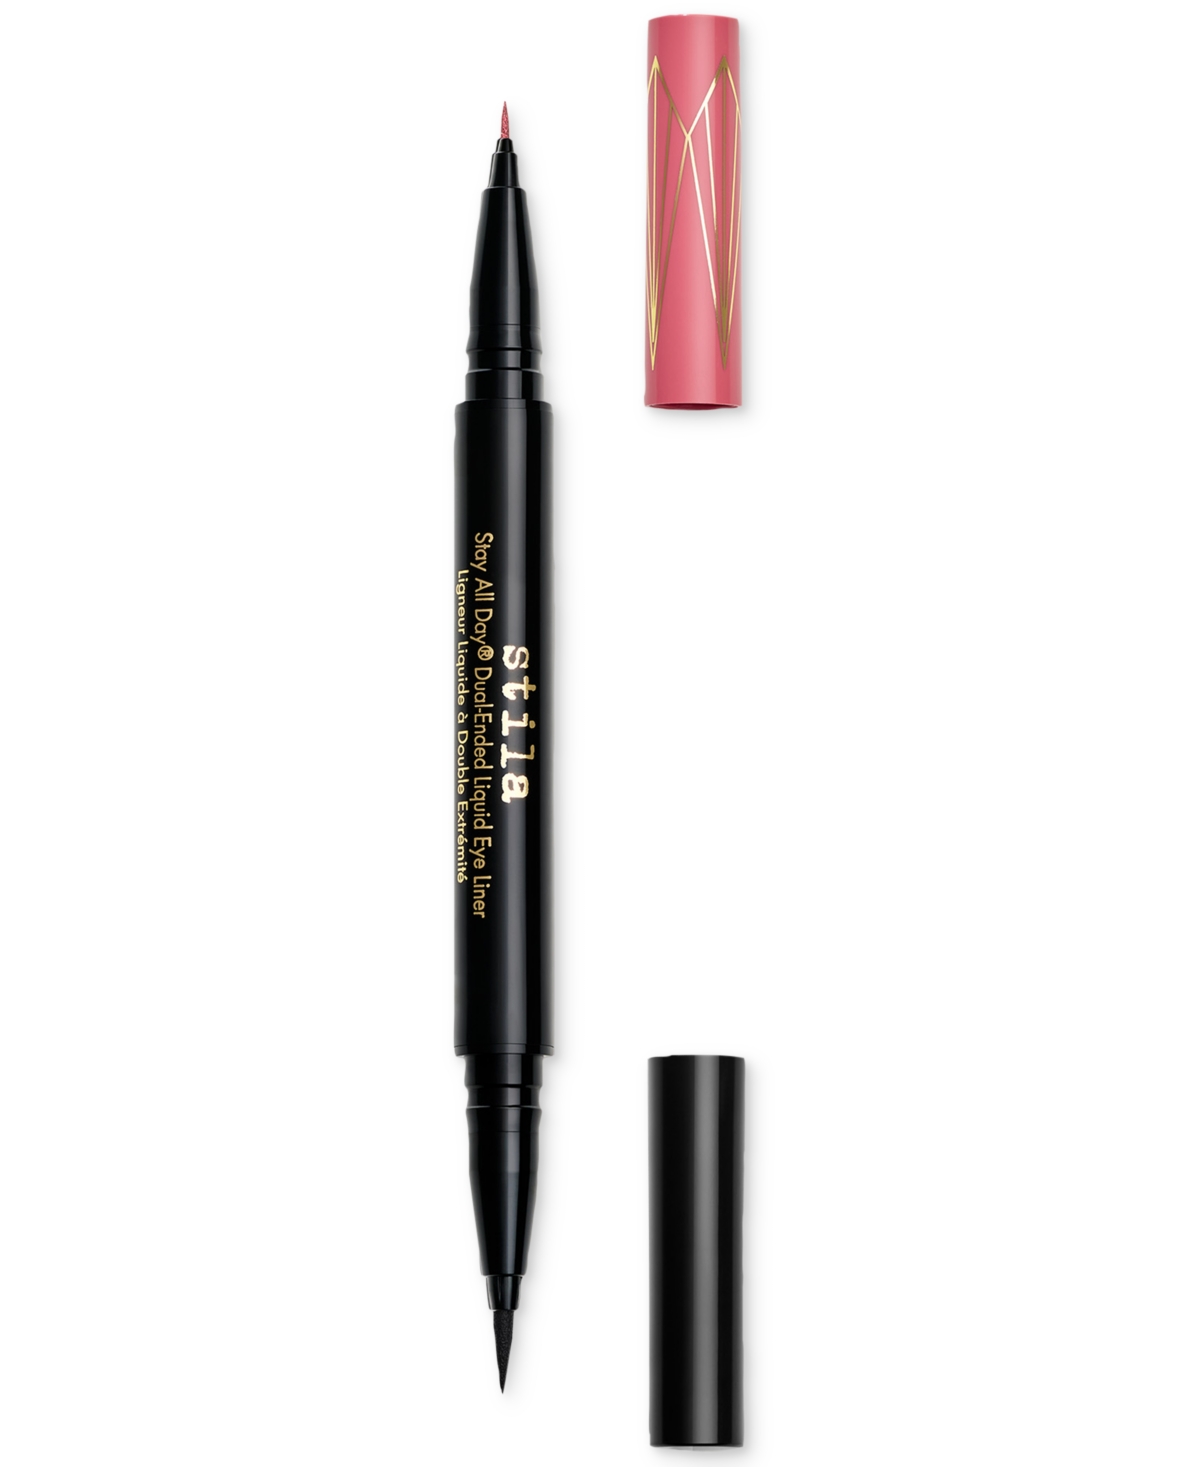 Stila Stay All Day Dual-ended Liquid Eye Liner In Rum Punch